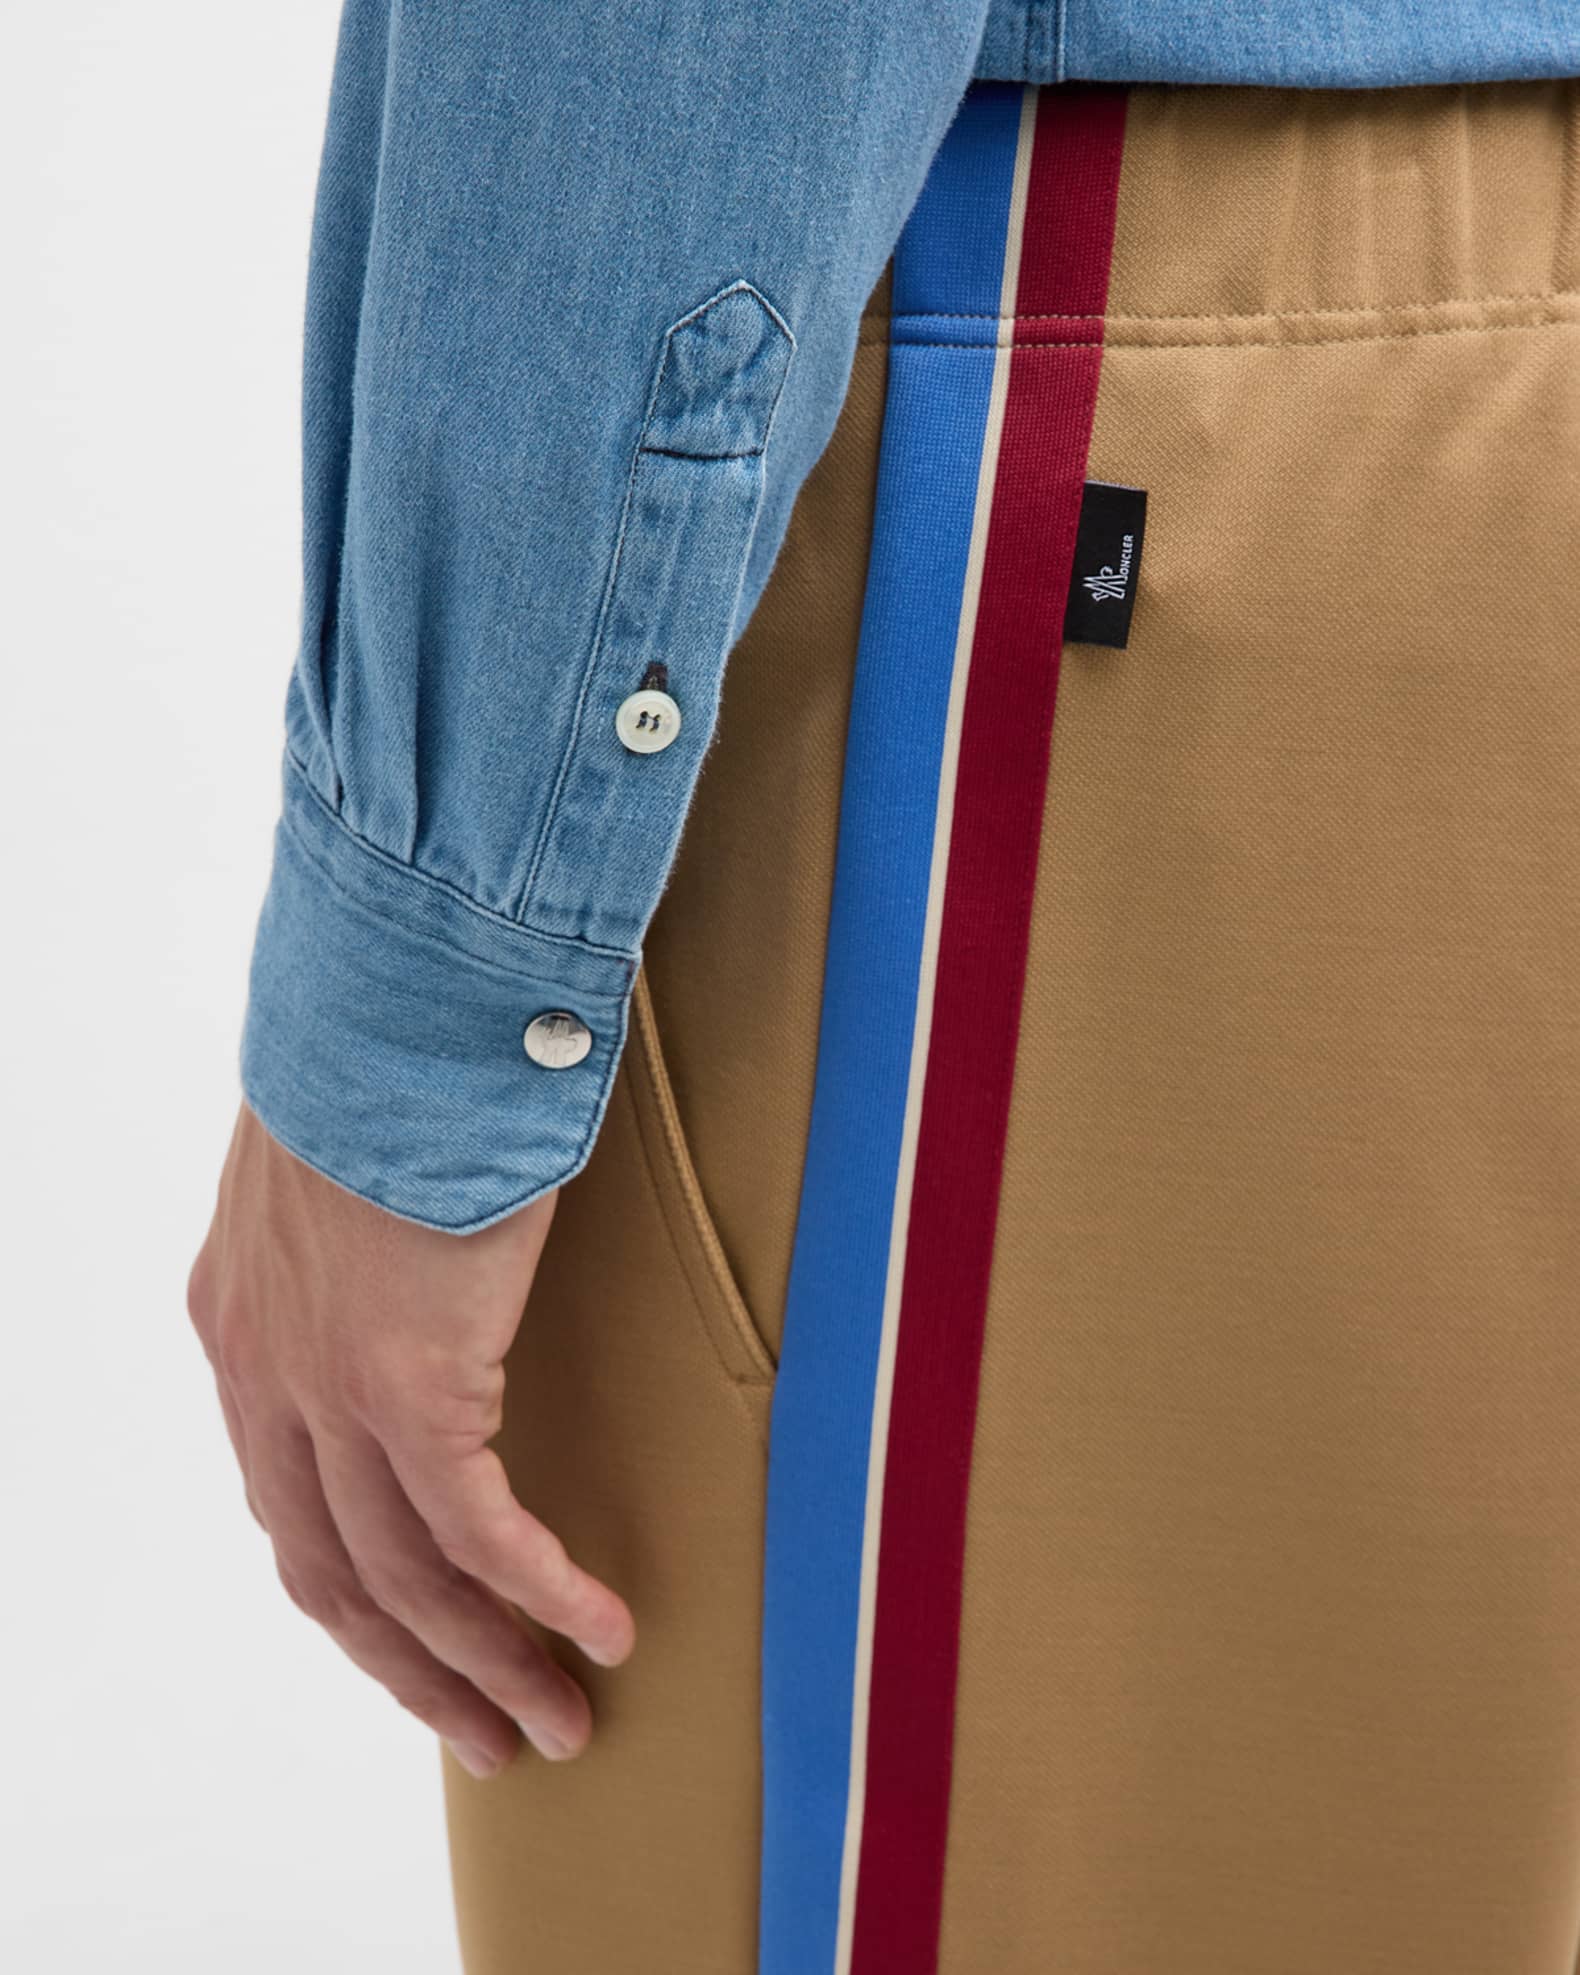 Gucci Trousers with side stripes, Men's Clothing